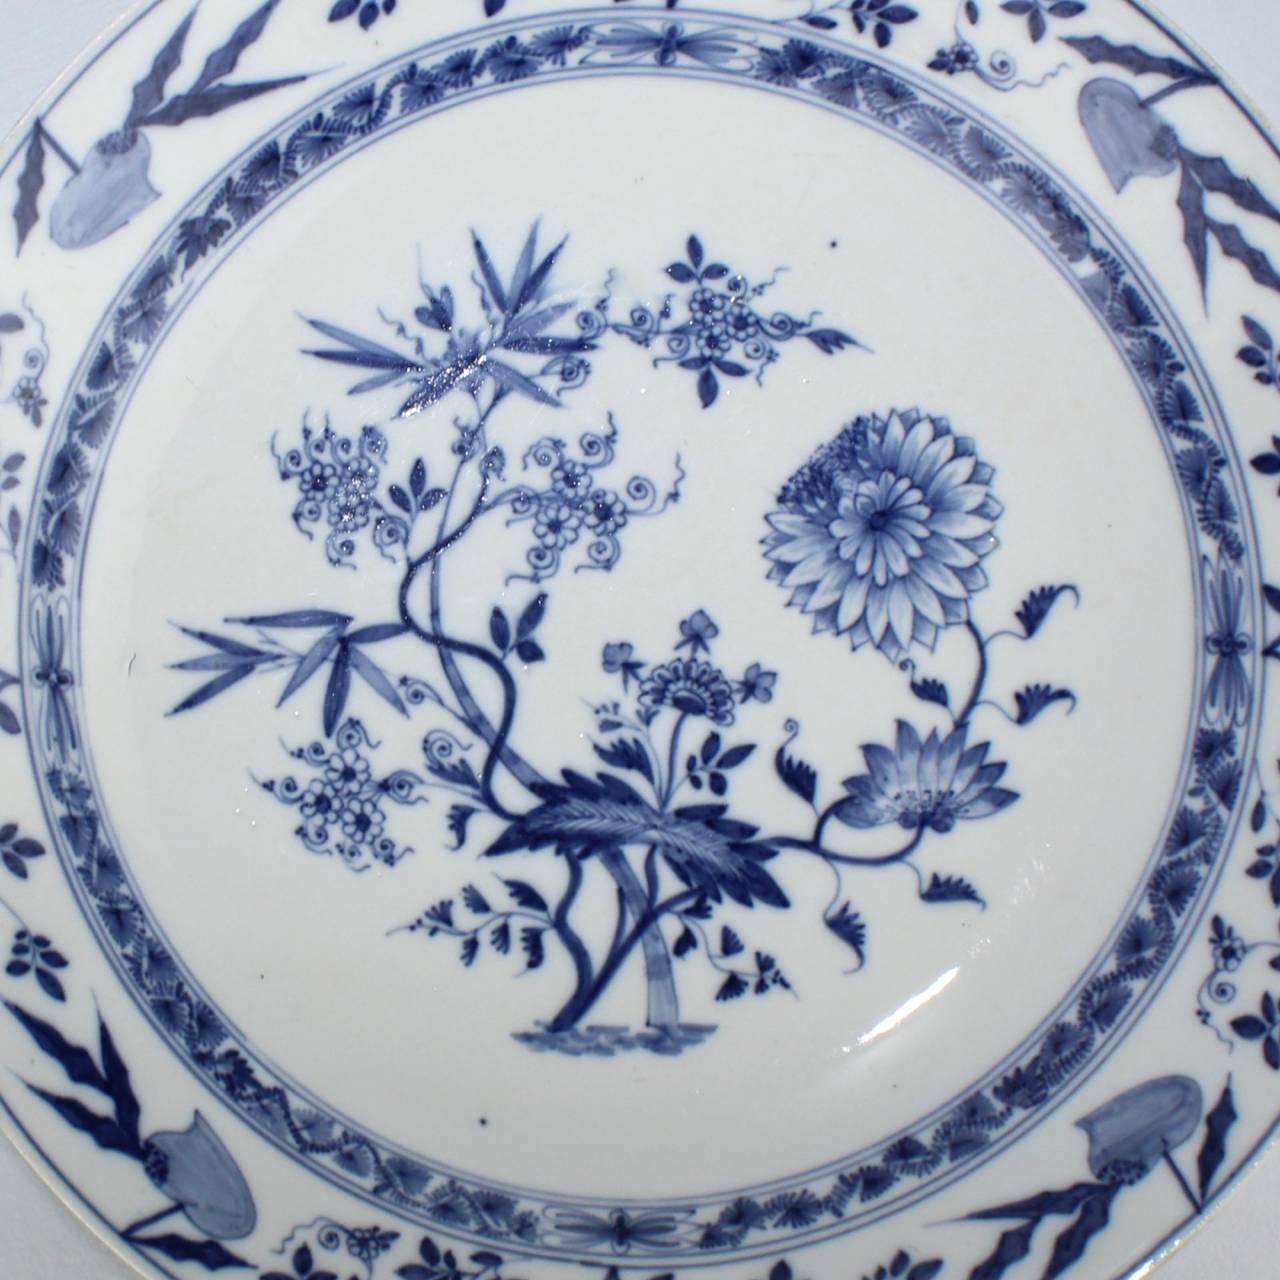 A fine and rare Meissen porcelain Blue Onion or 'Zwiebelmuster' porcelain charger.

The charger dates to Marcolini Period of Meissen porcelain production, which spanned from the late 18th to the early 19th century. It has the typical blue and